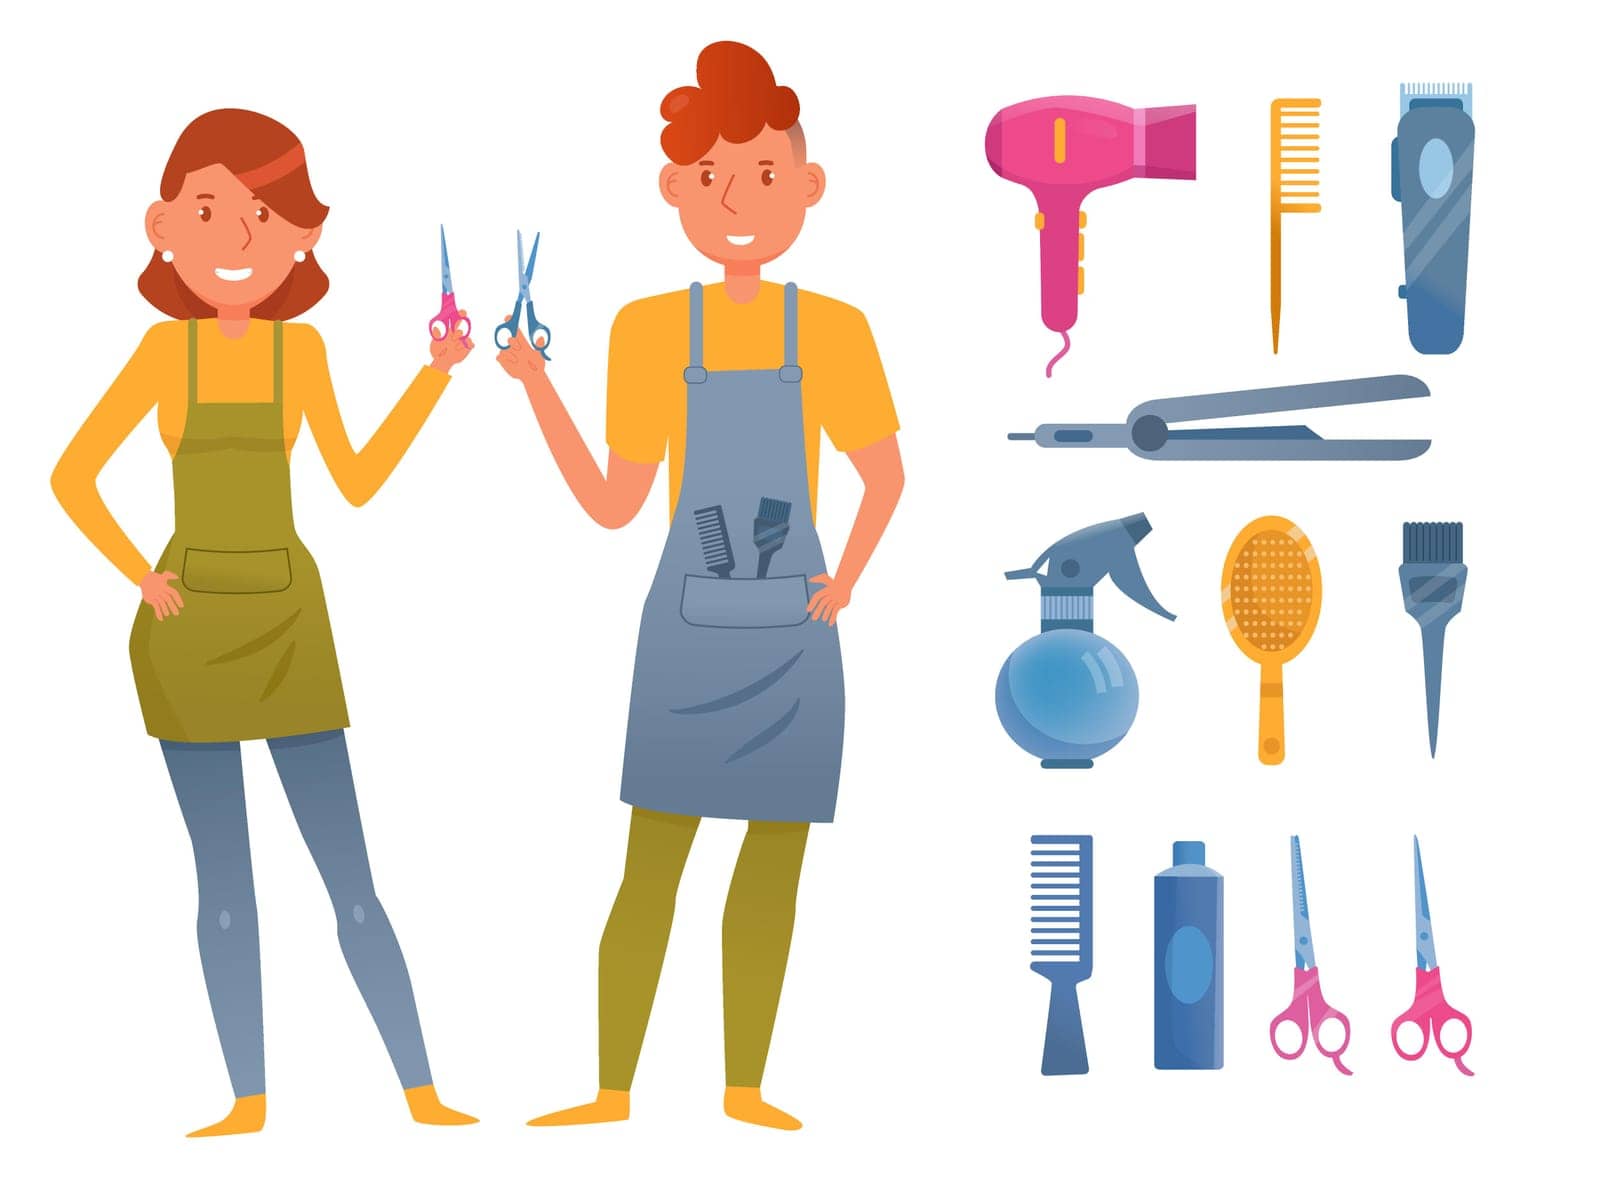 Cartoon hairdressers with accessories vector illustrations set. Characters in aprons with barbershop equipment: combs, scissors isolated on white background. Job or professions concept for kids